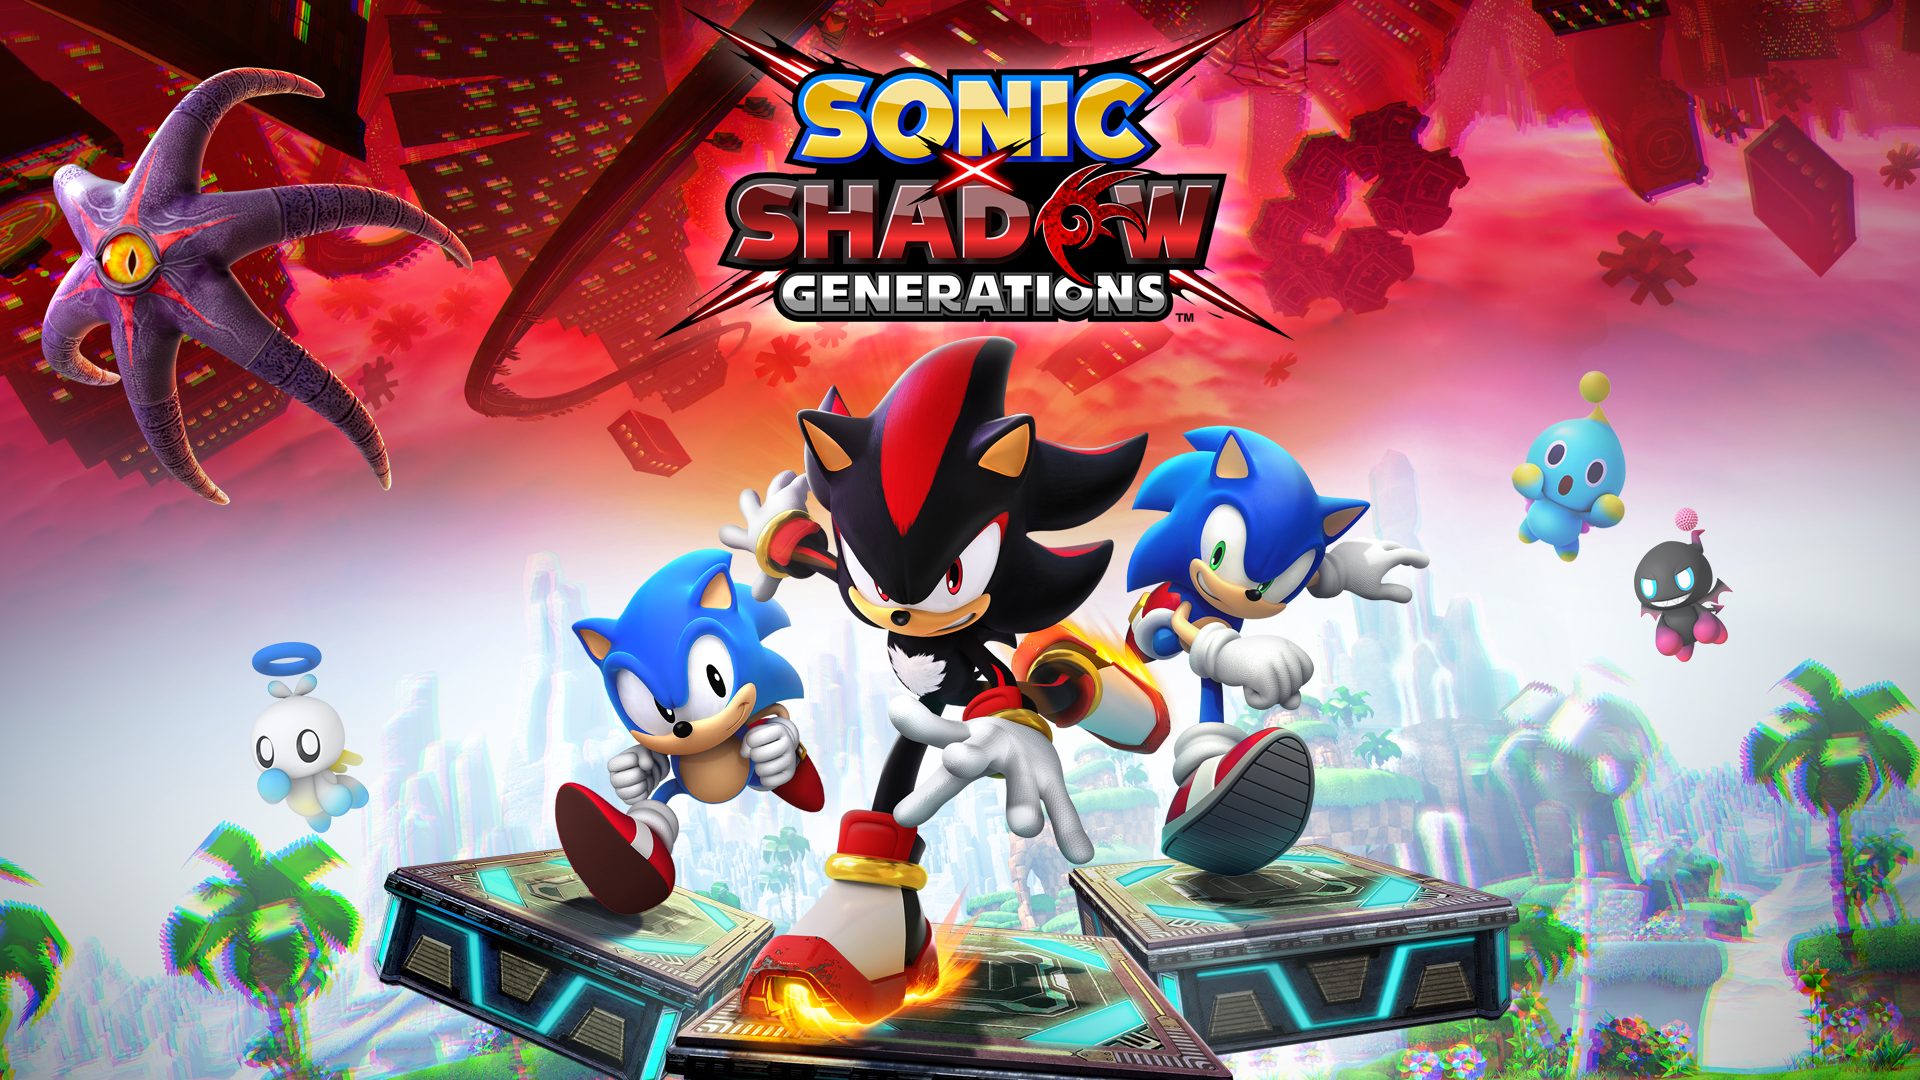 Sonic the Hedgehog and Shadow the Hedgehog Team Up in Sonic x Shadow Generations: A Remastered Adventure